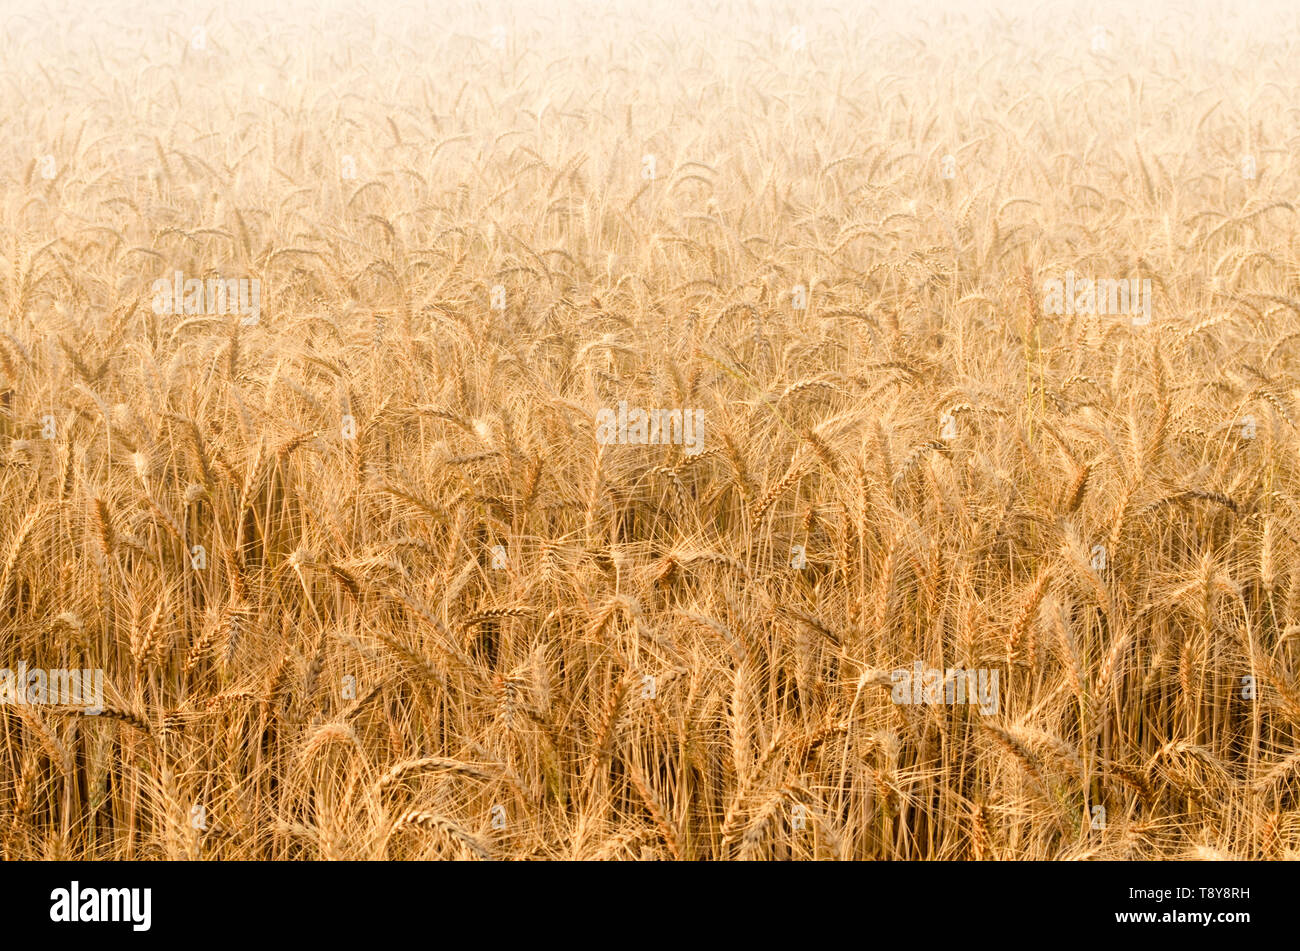 Golden wheat field background with ripened spikelets Stock Photo